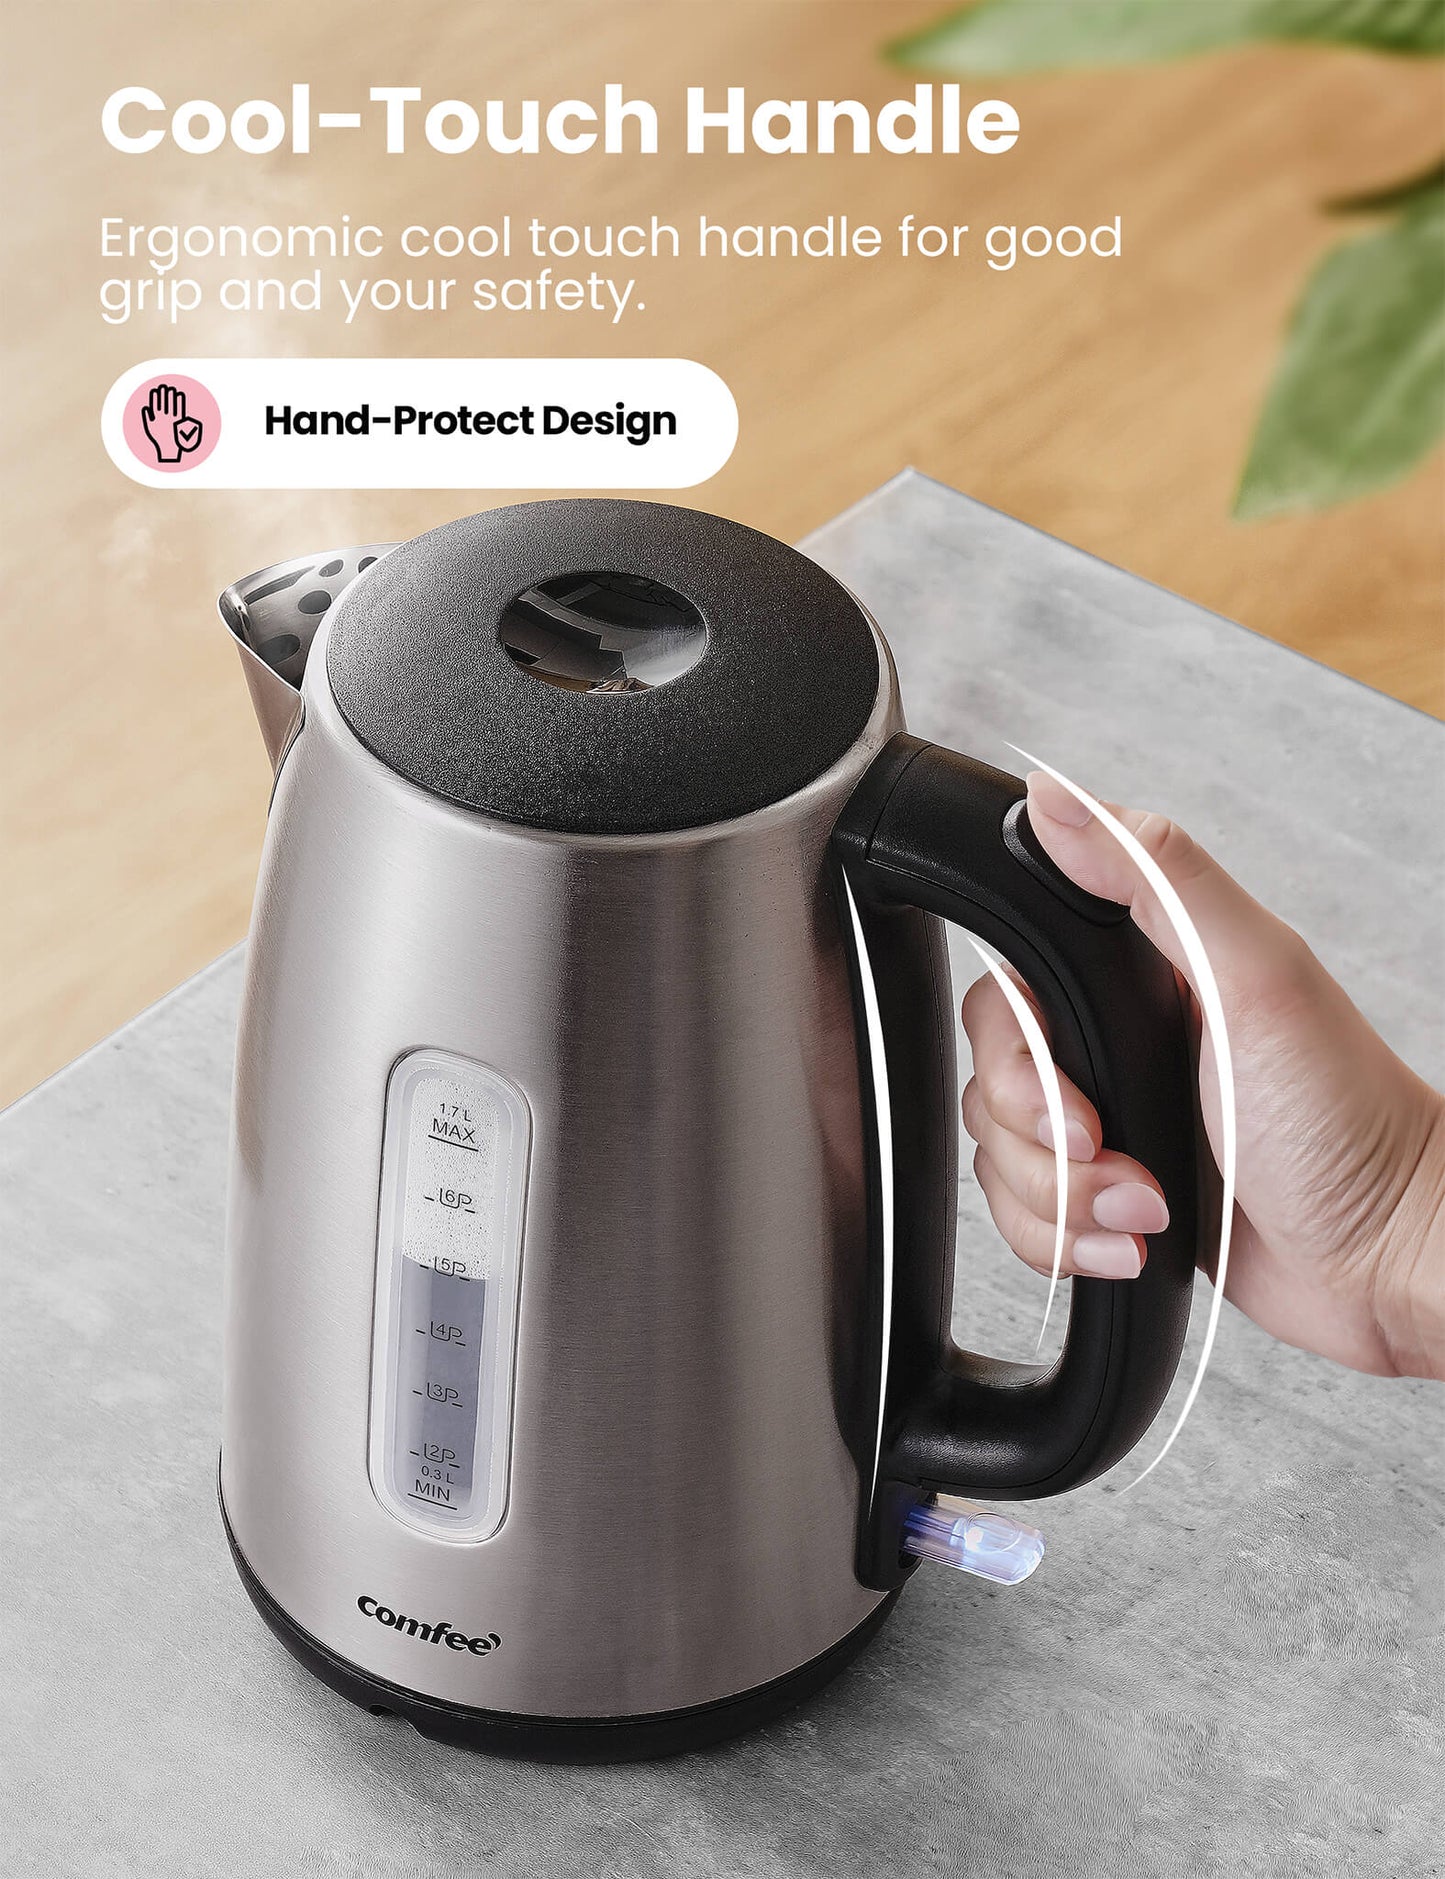 comfee stainless steel electric kettle with hand-protect design